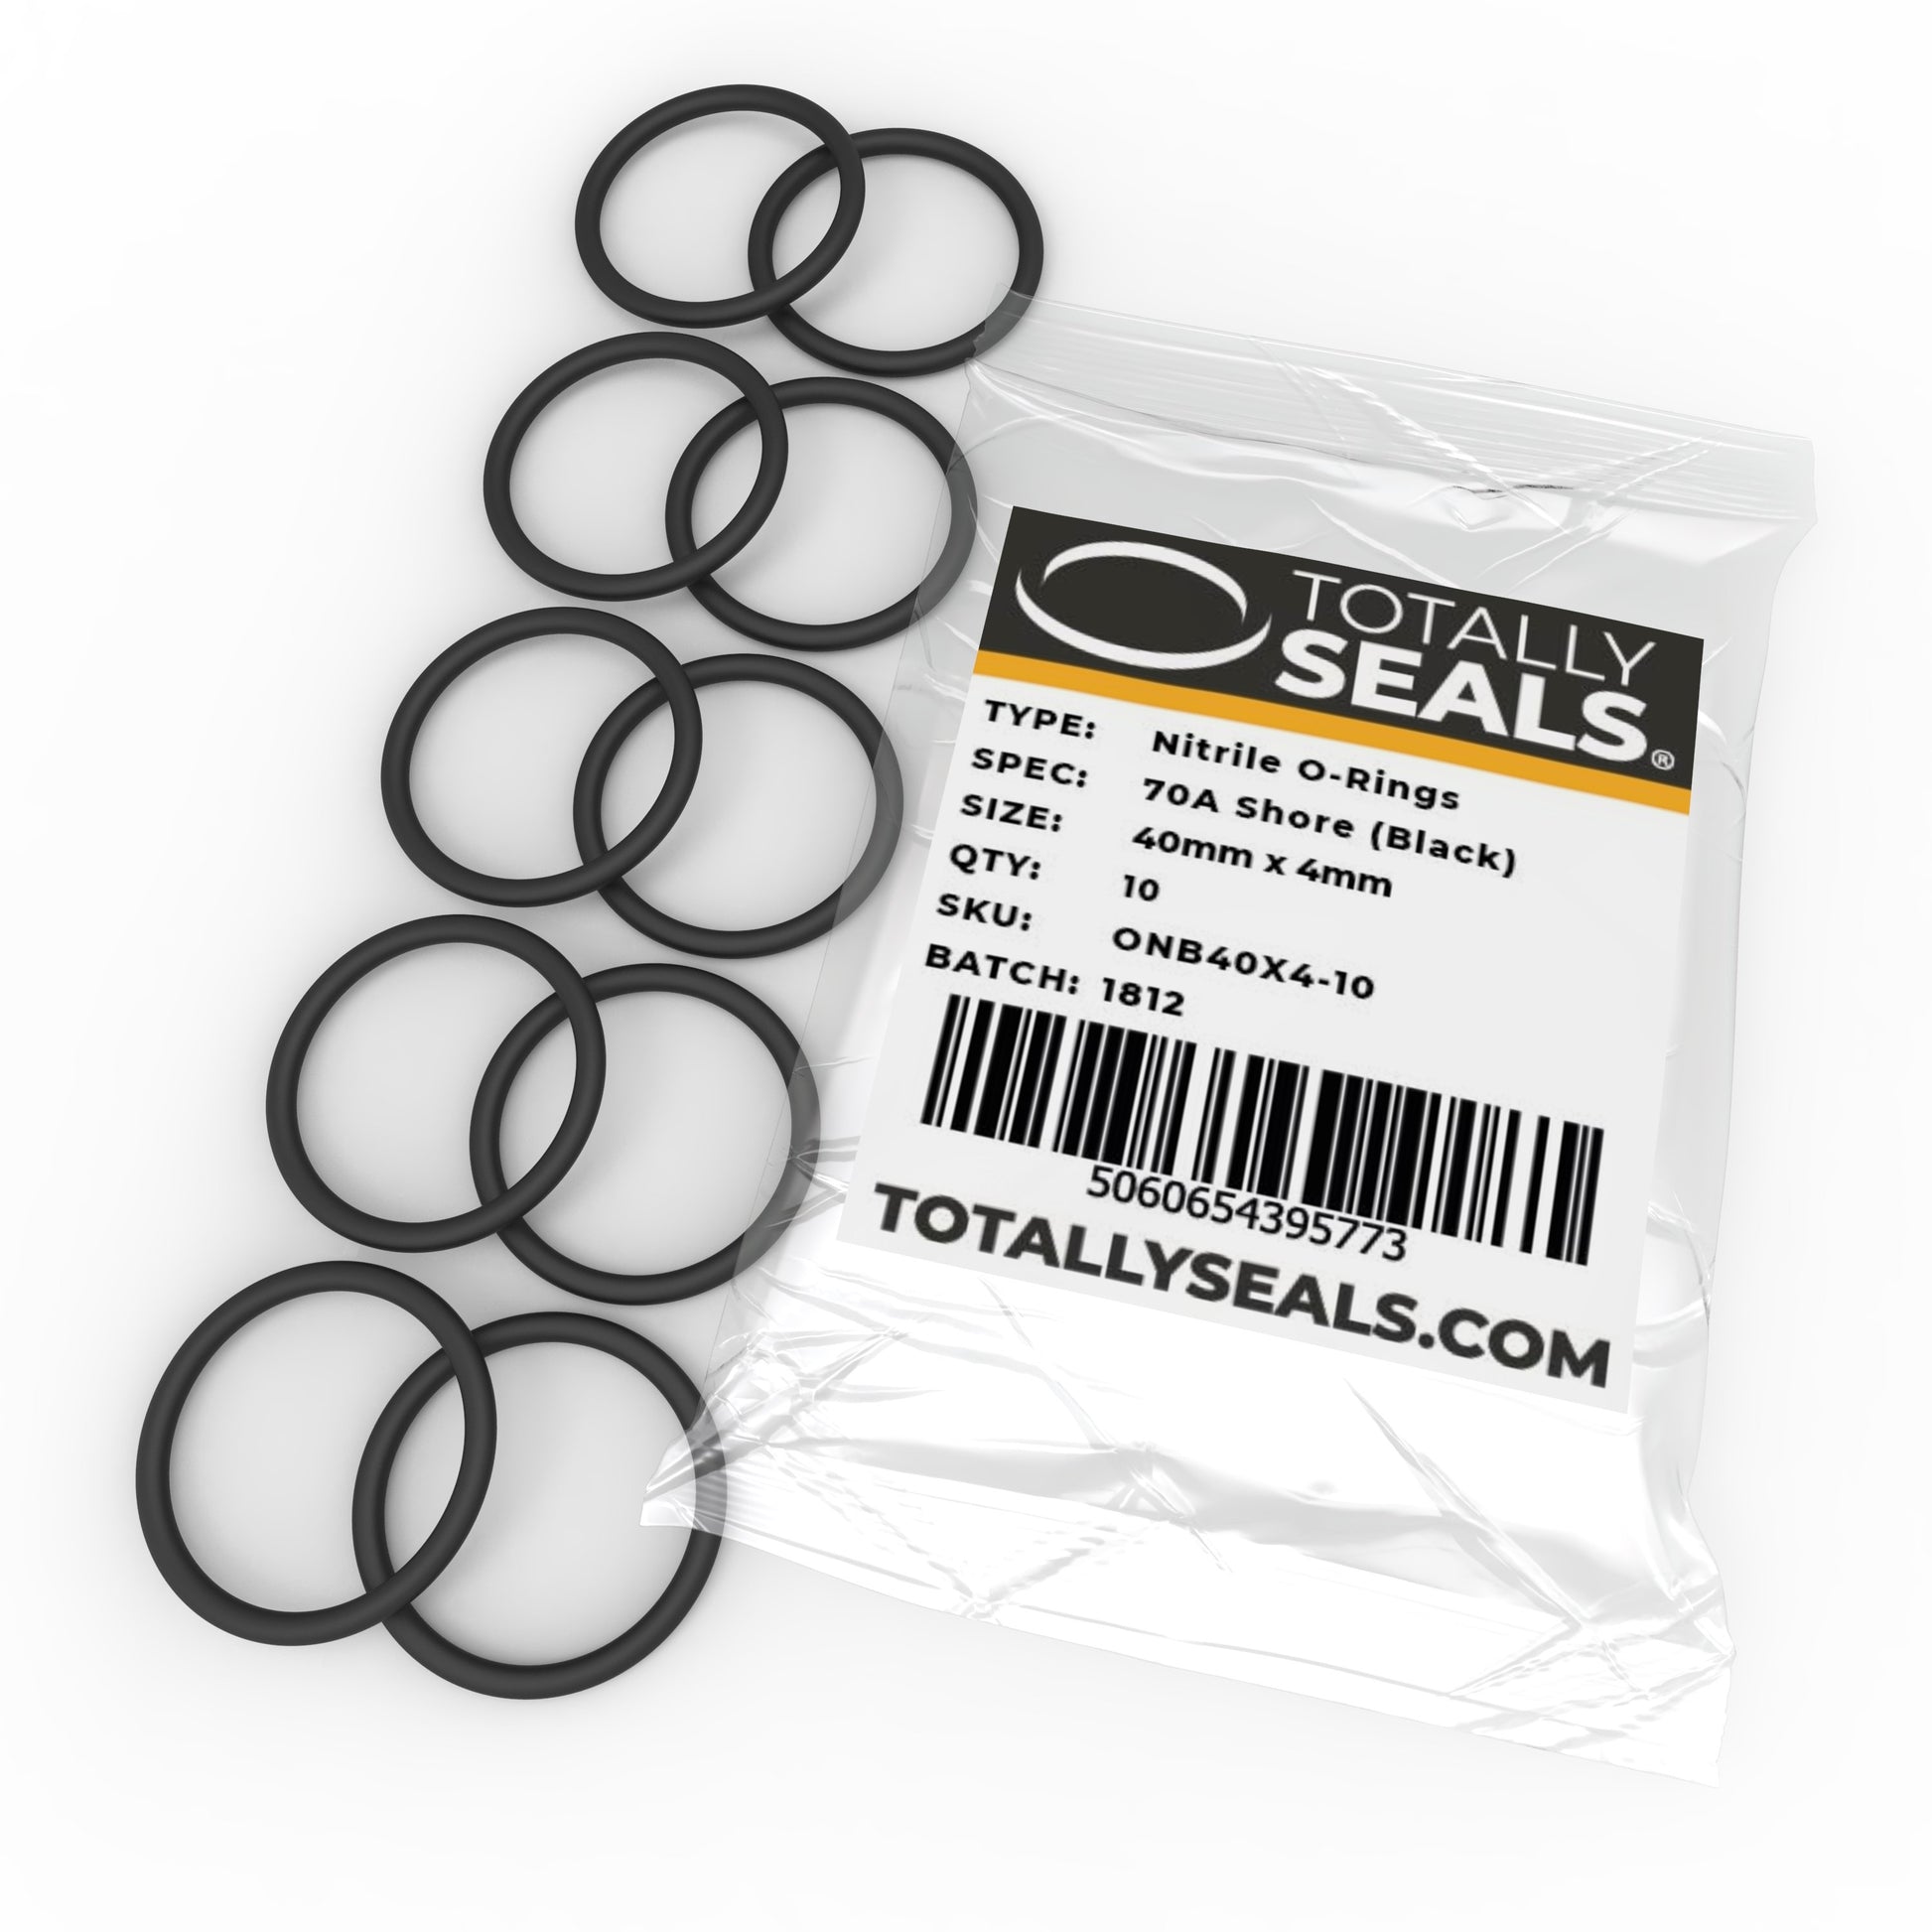 40mm x 4mm (48mm OD) Nitrile O-Rings - Totally Seals®